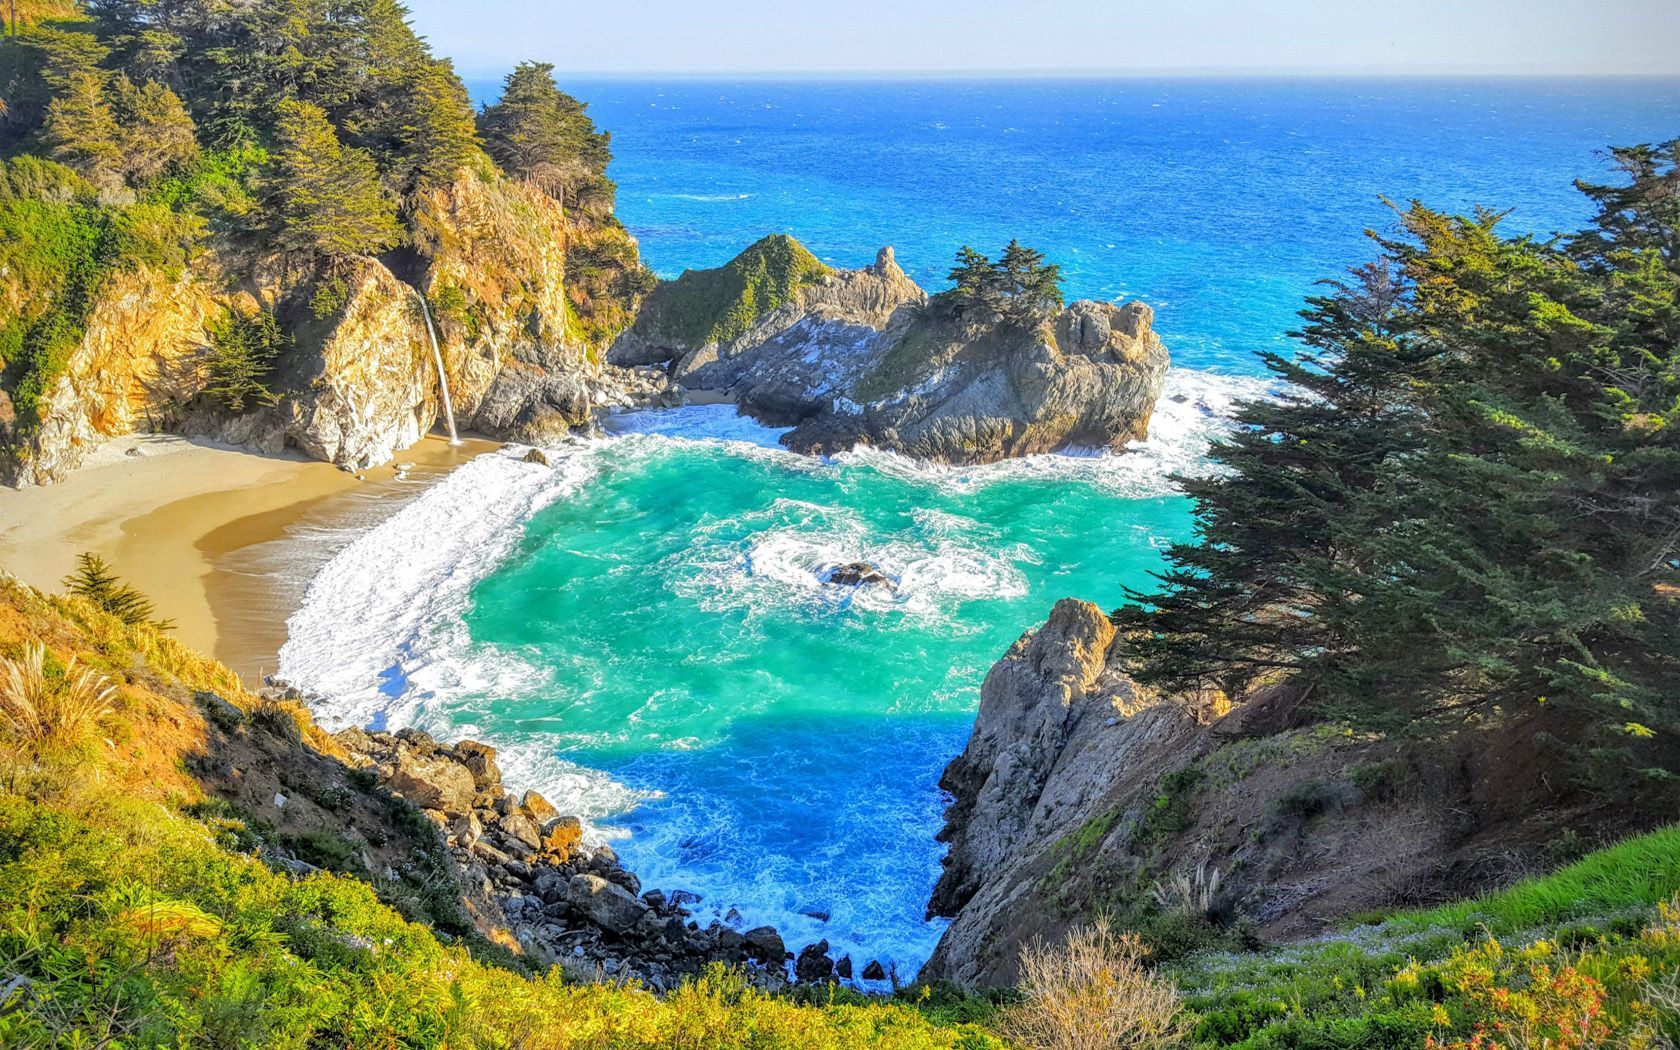 Discover the majestic McWay Falls at Julia Pfeiffer Burns State